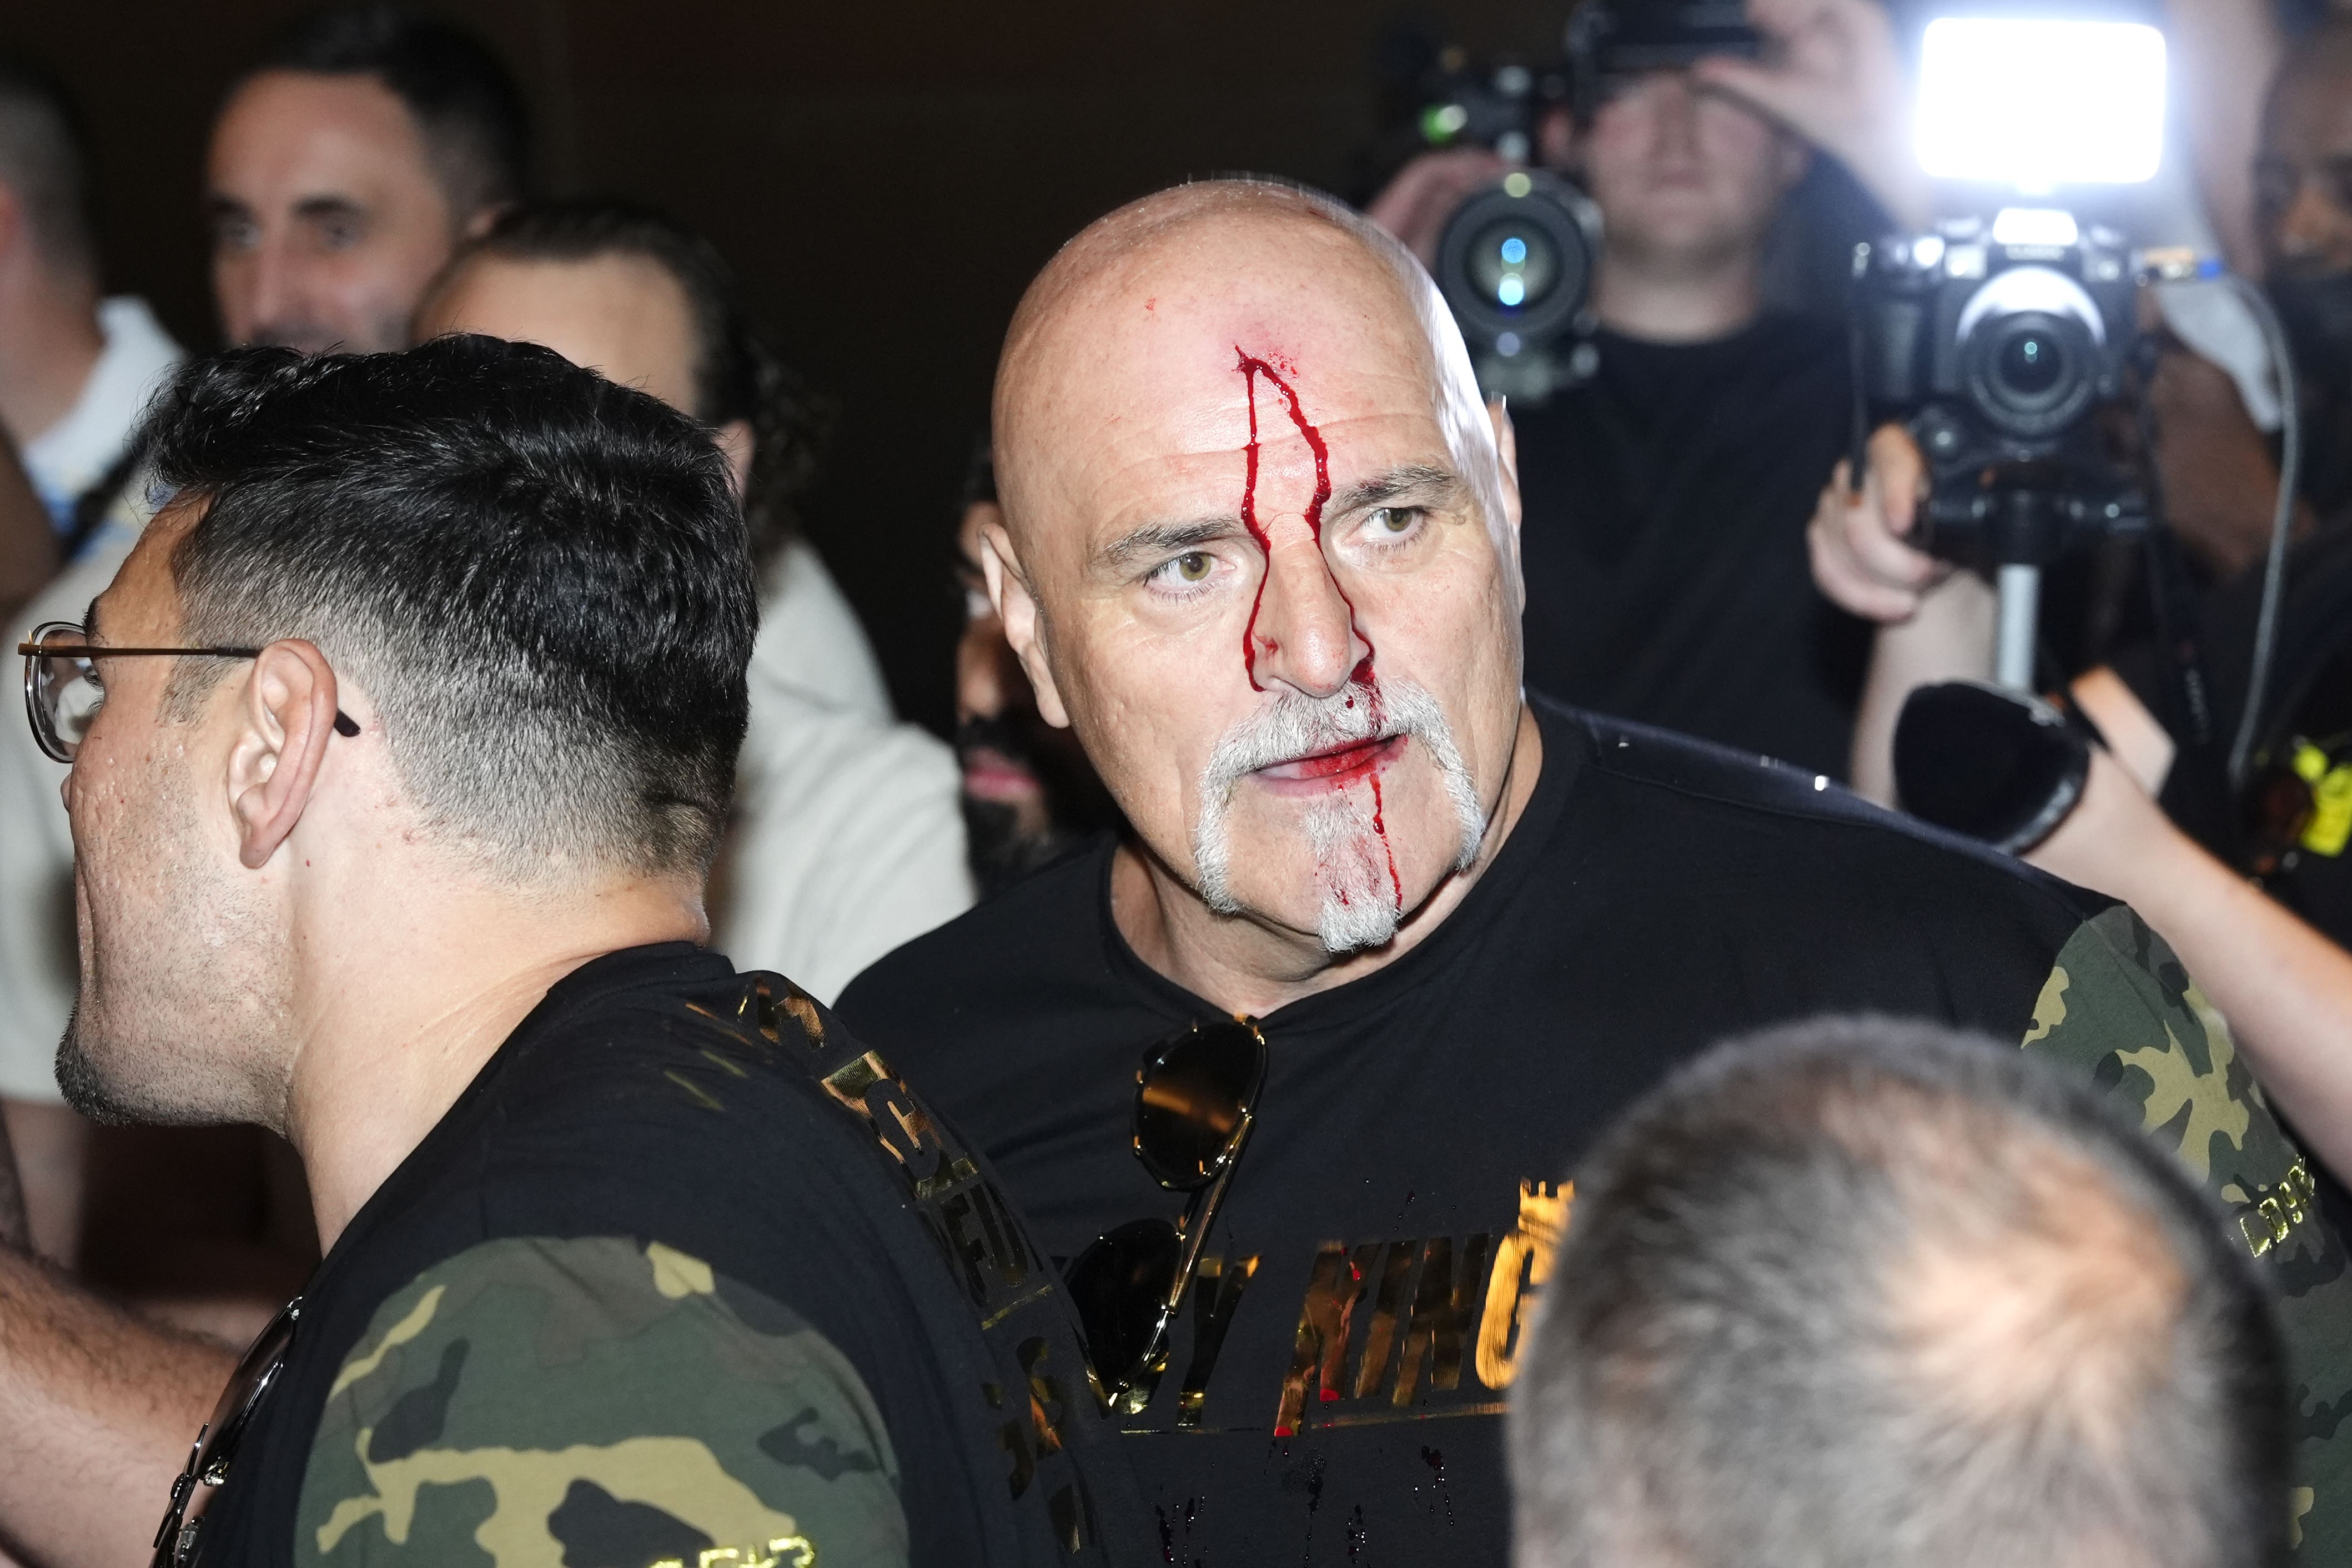 John Fury sustained a cut after headbutting one of Oleksandr Usyk’s teammates